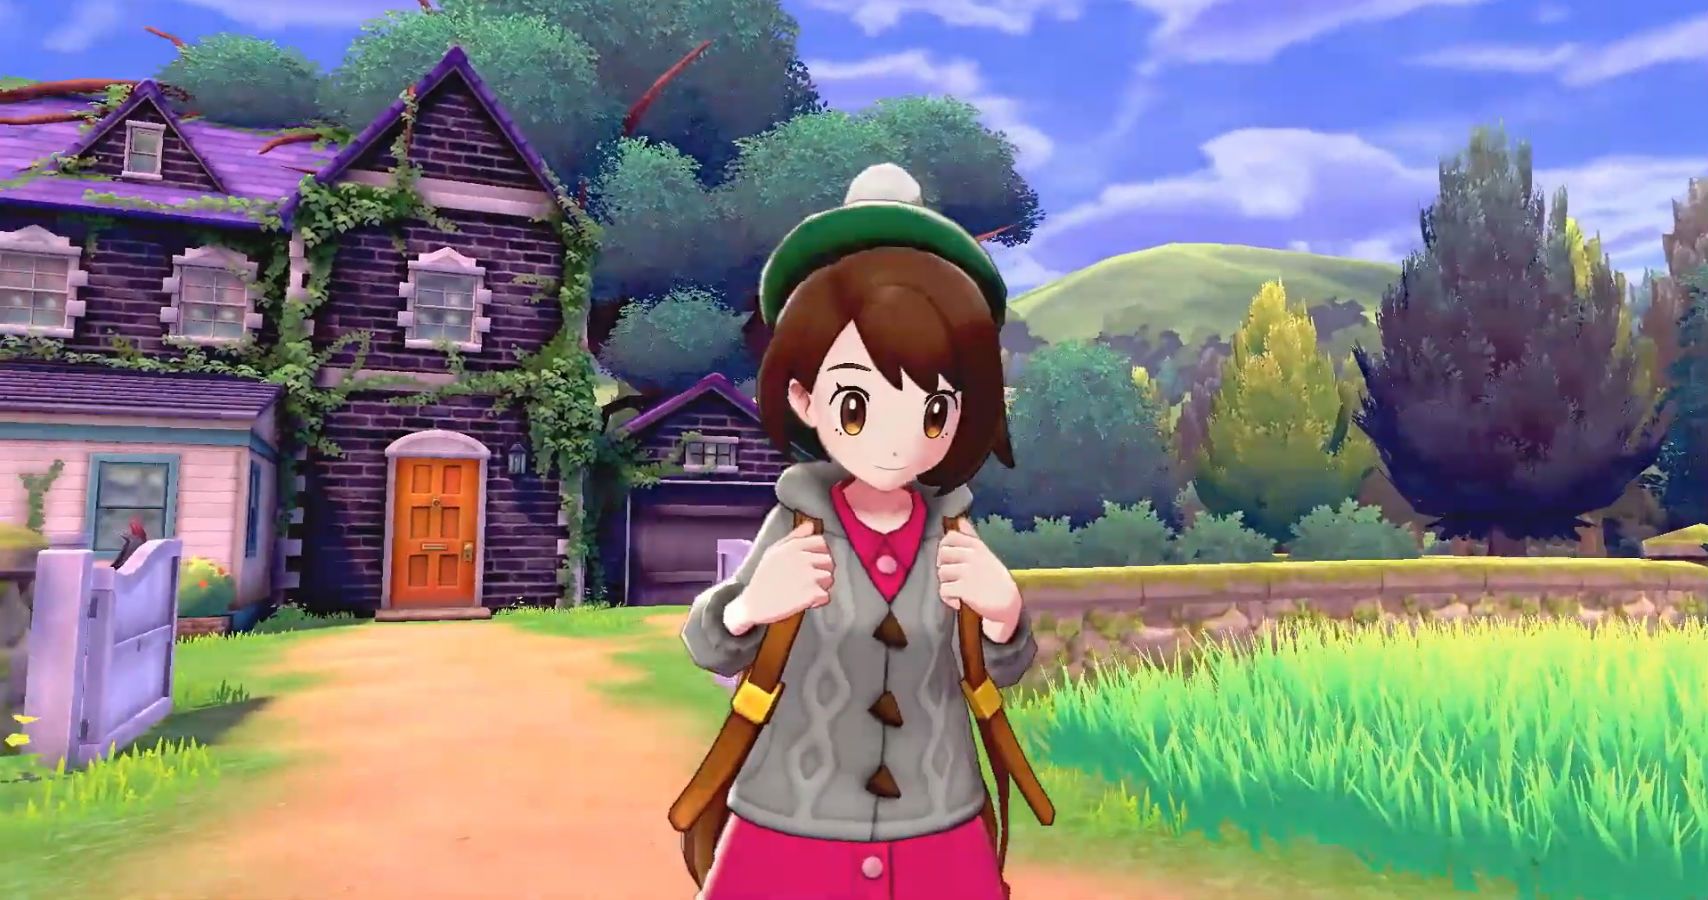 Pokémon Sword and Shield Exclusive Coverage - Game Informer